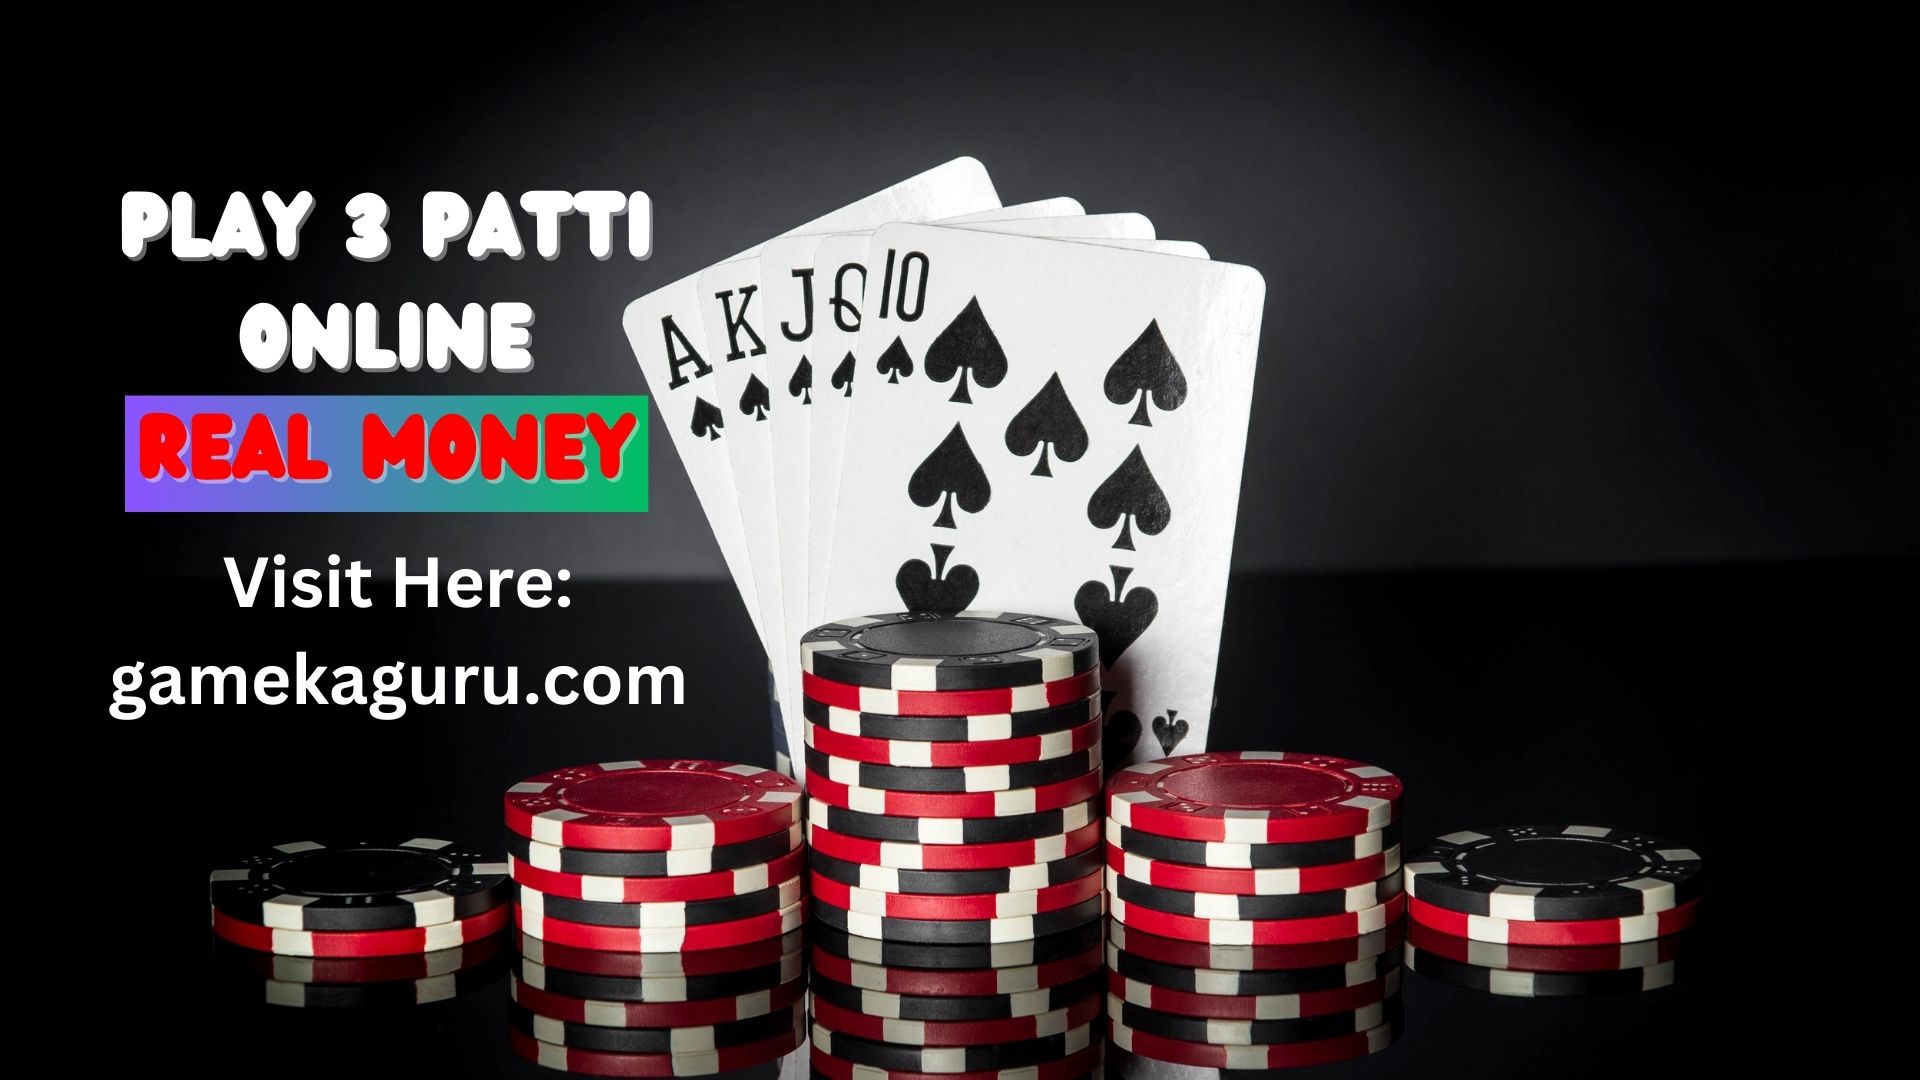 Play 3 Patti Online Real Money